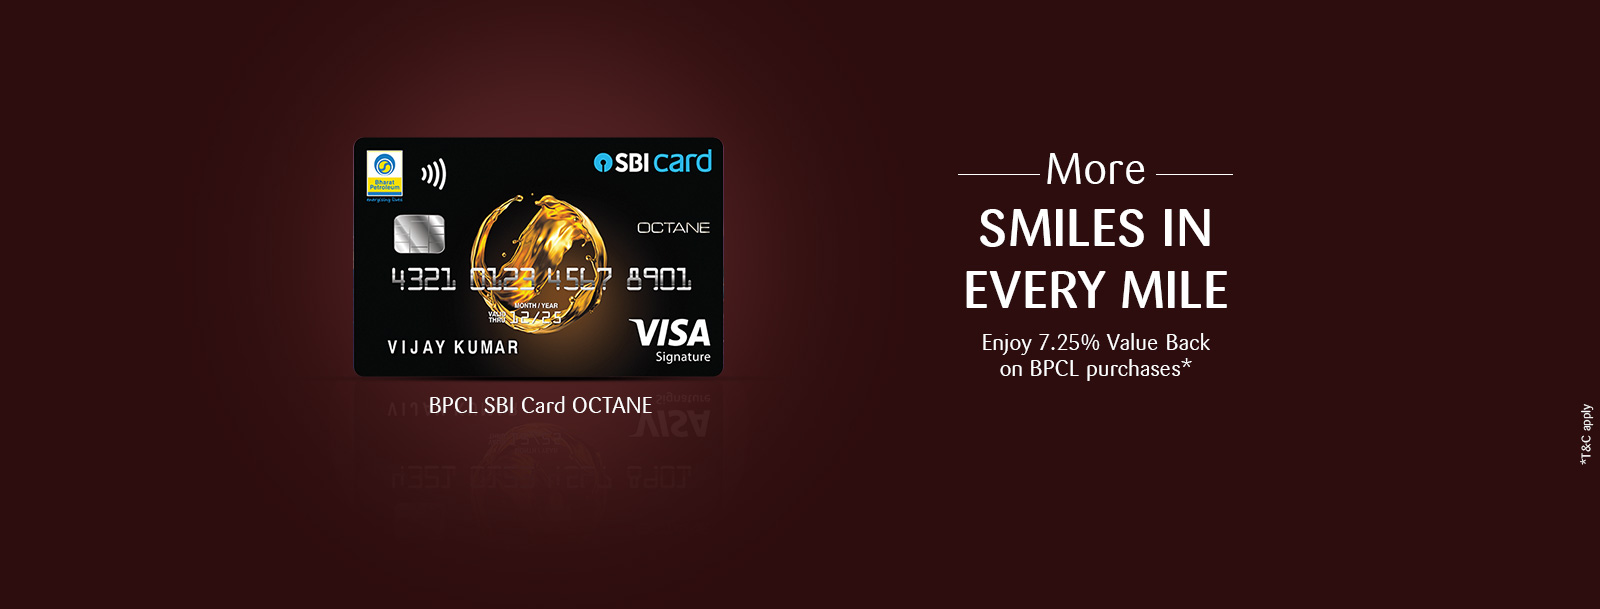 BPCL SBI Credit Card OCTANE - Fuel Credit Card - Apply Now